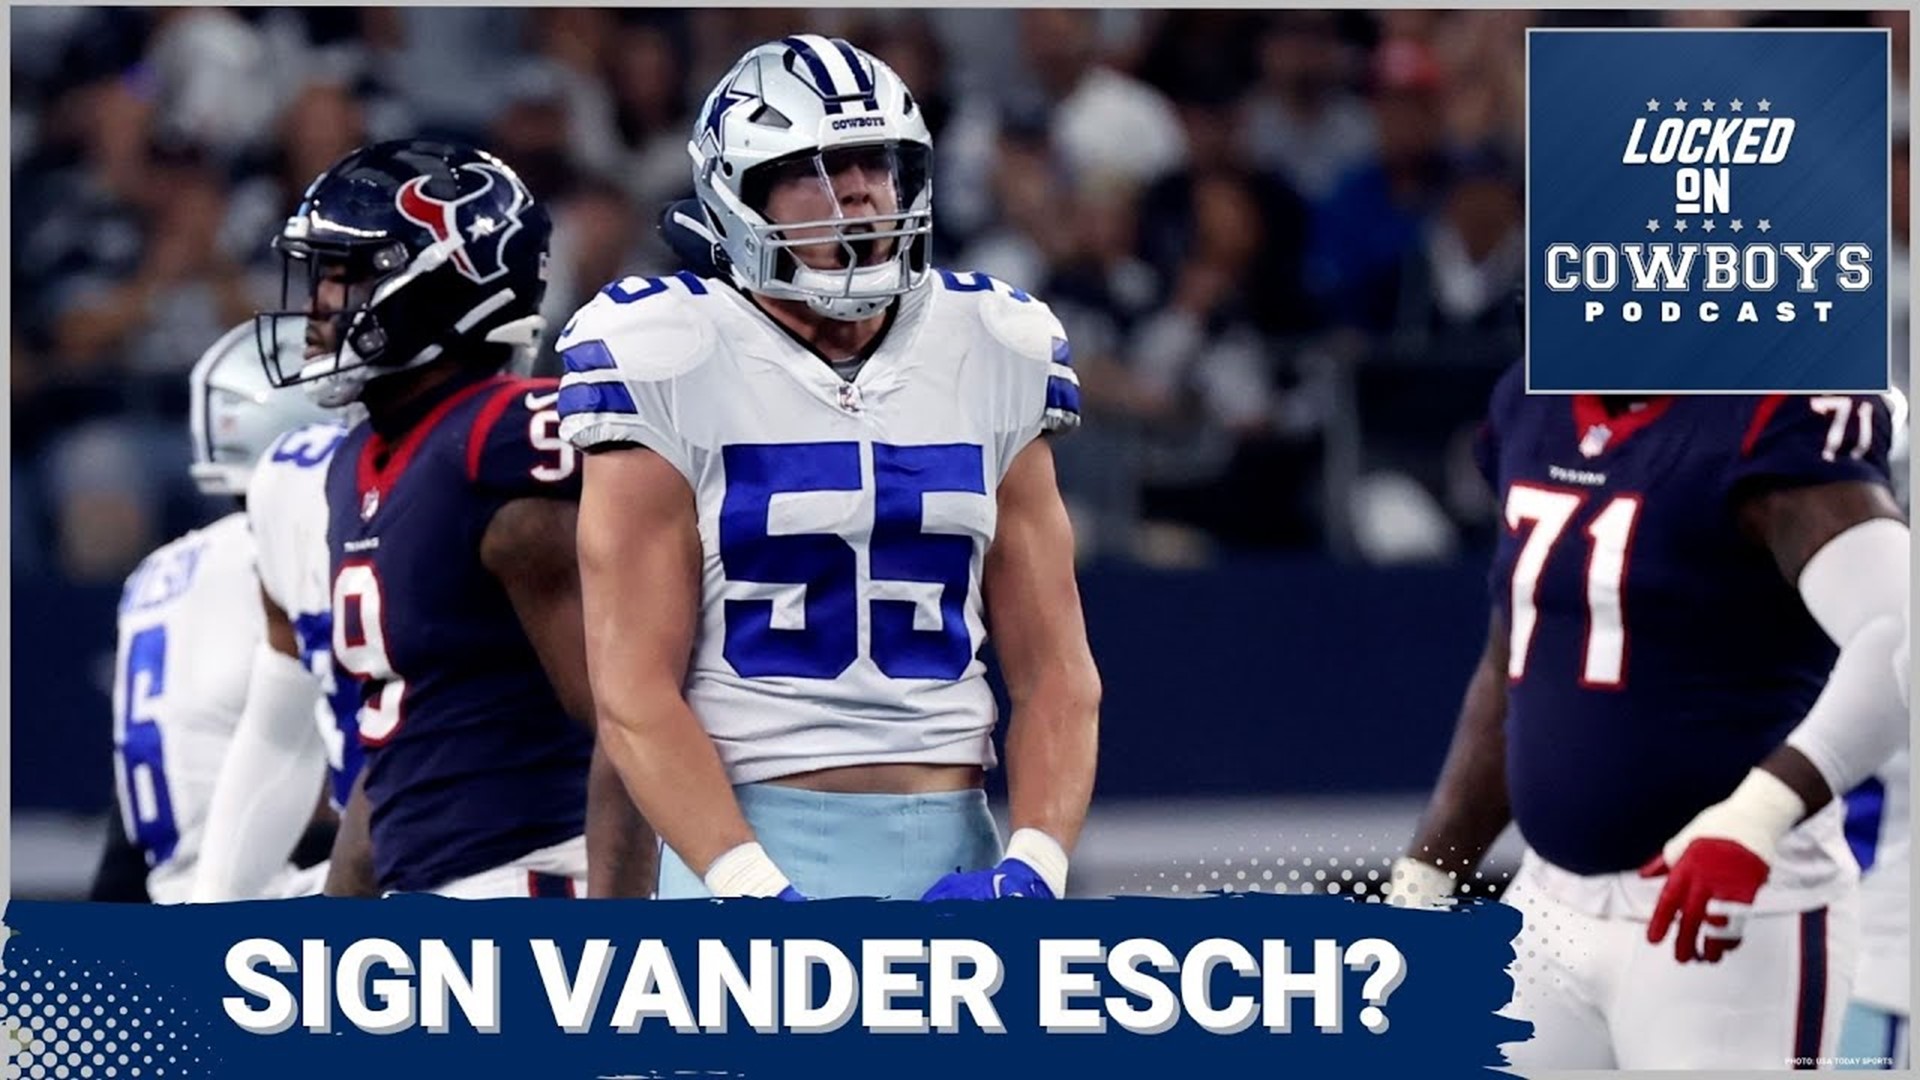 Marcus Mosher and Landon McCool review the 2022 season from the Cowboys' linebacker unit, and discuss whether the team should sign Leighton Vander Esch to a contract